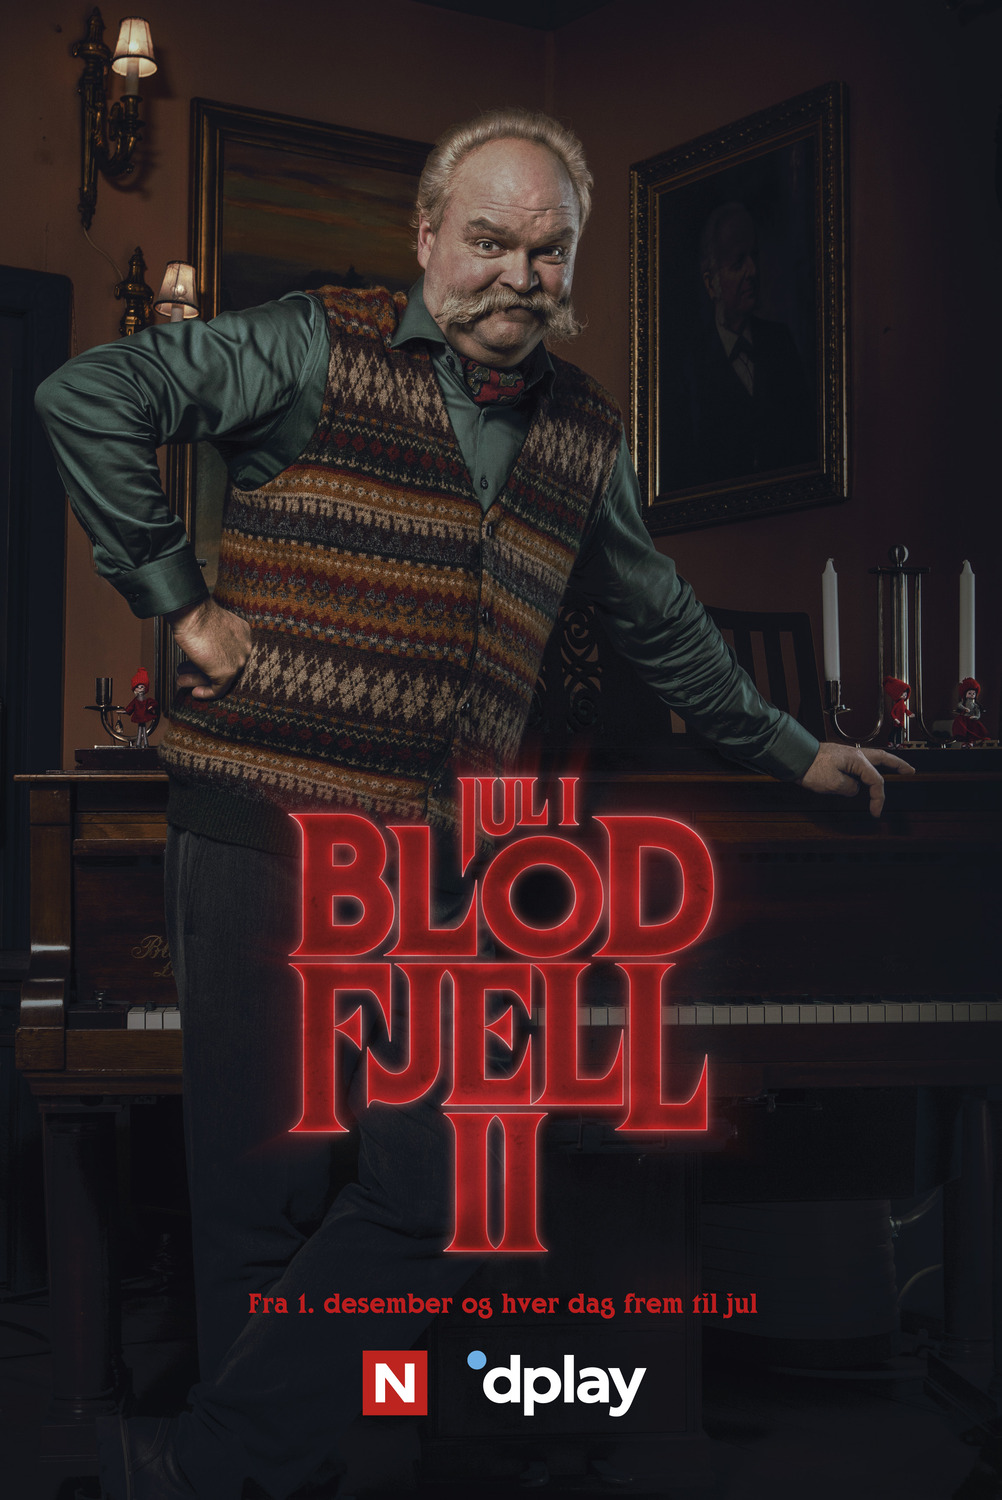 Extra Large TV Poster Image for Jul i Blodfjell (#10 of 11)